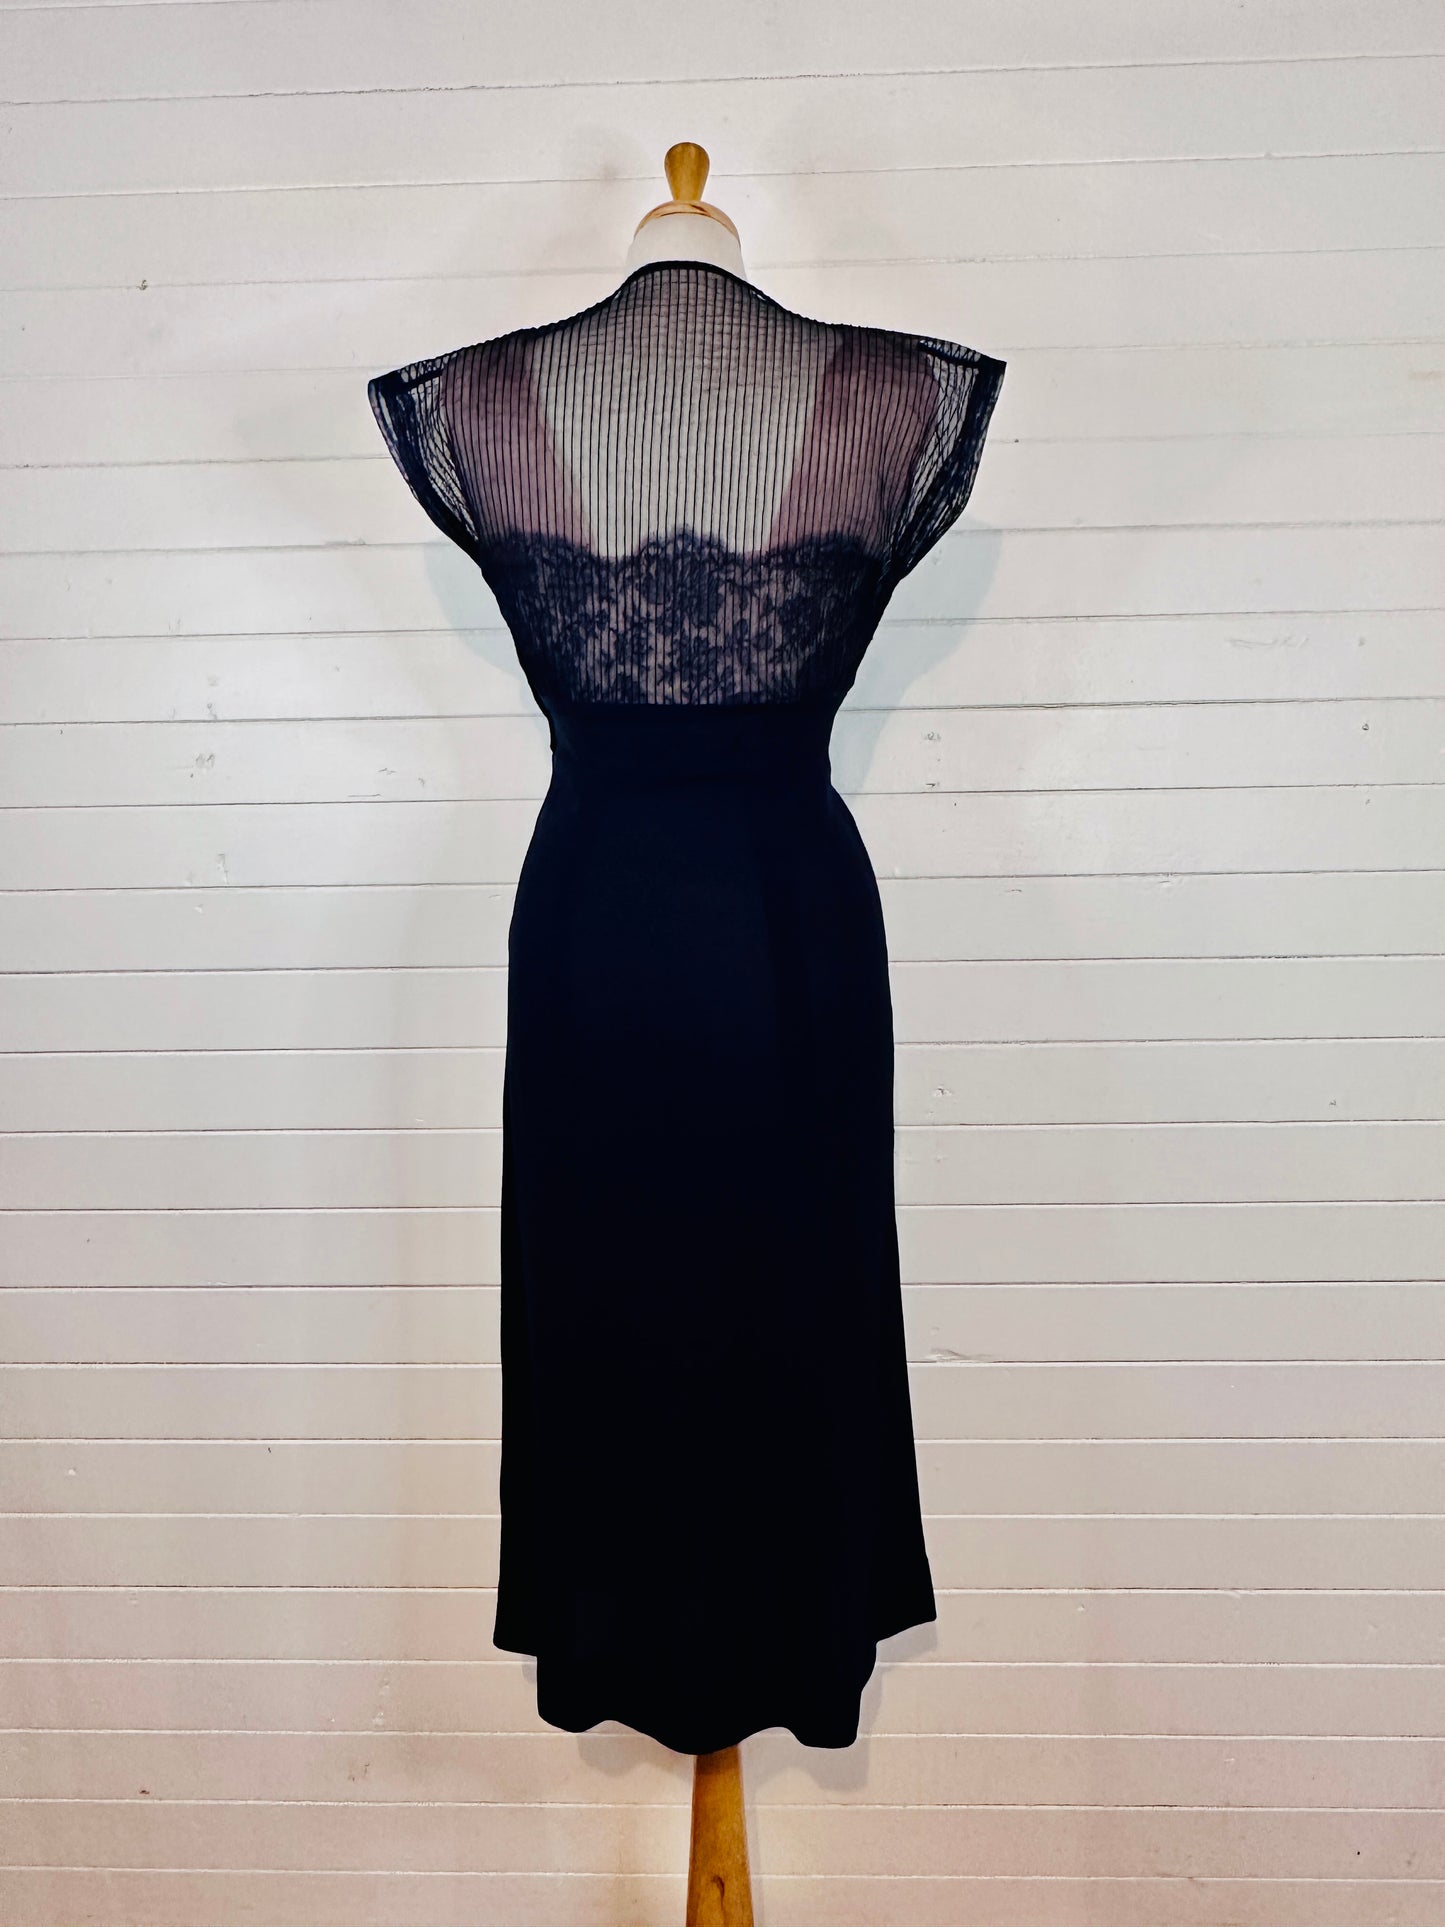 Early 1950's Frenchshire New Look Navy Crépe and Lace Cocktail Dress (M)